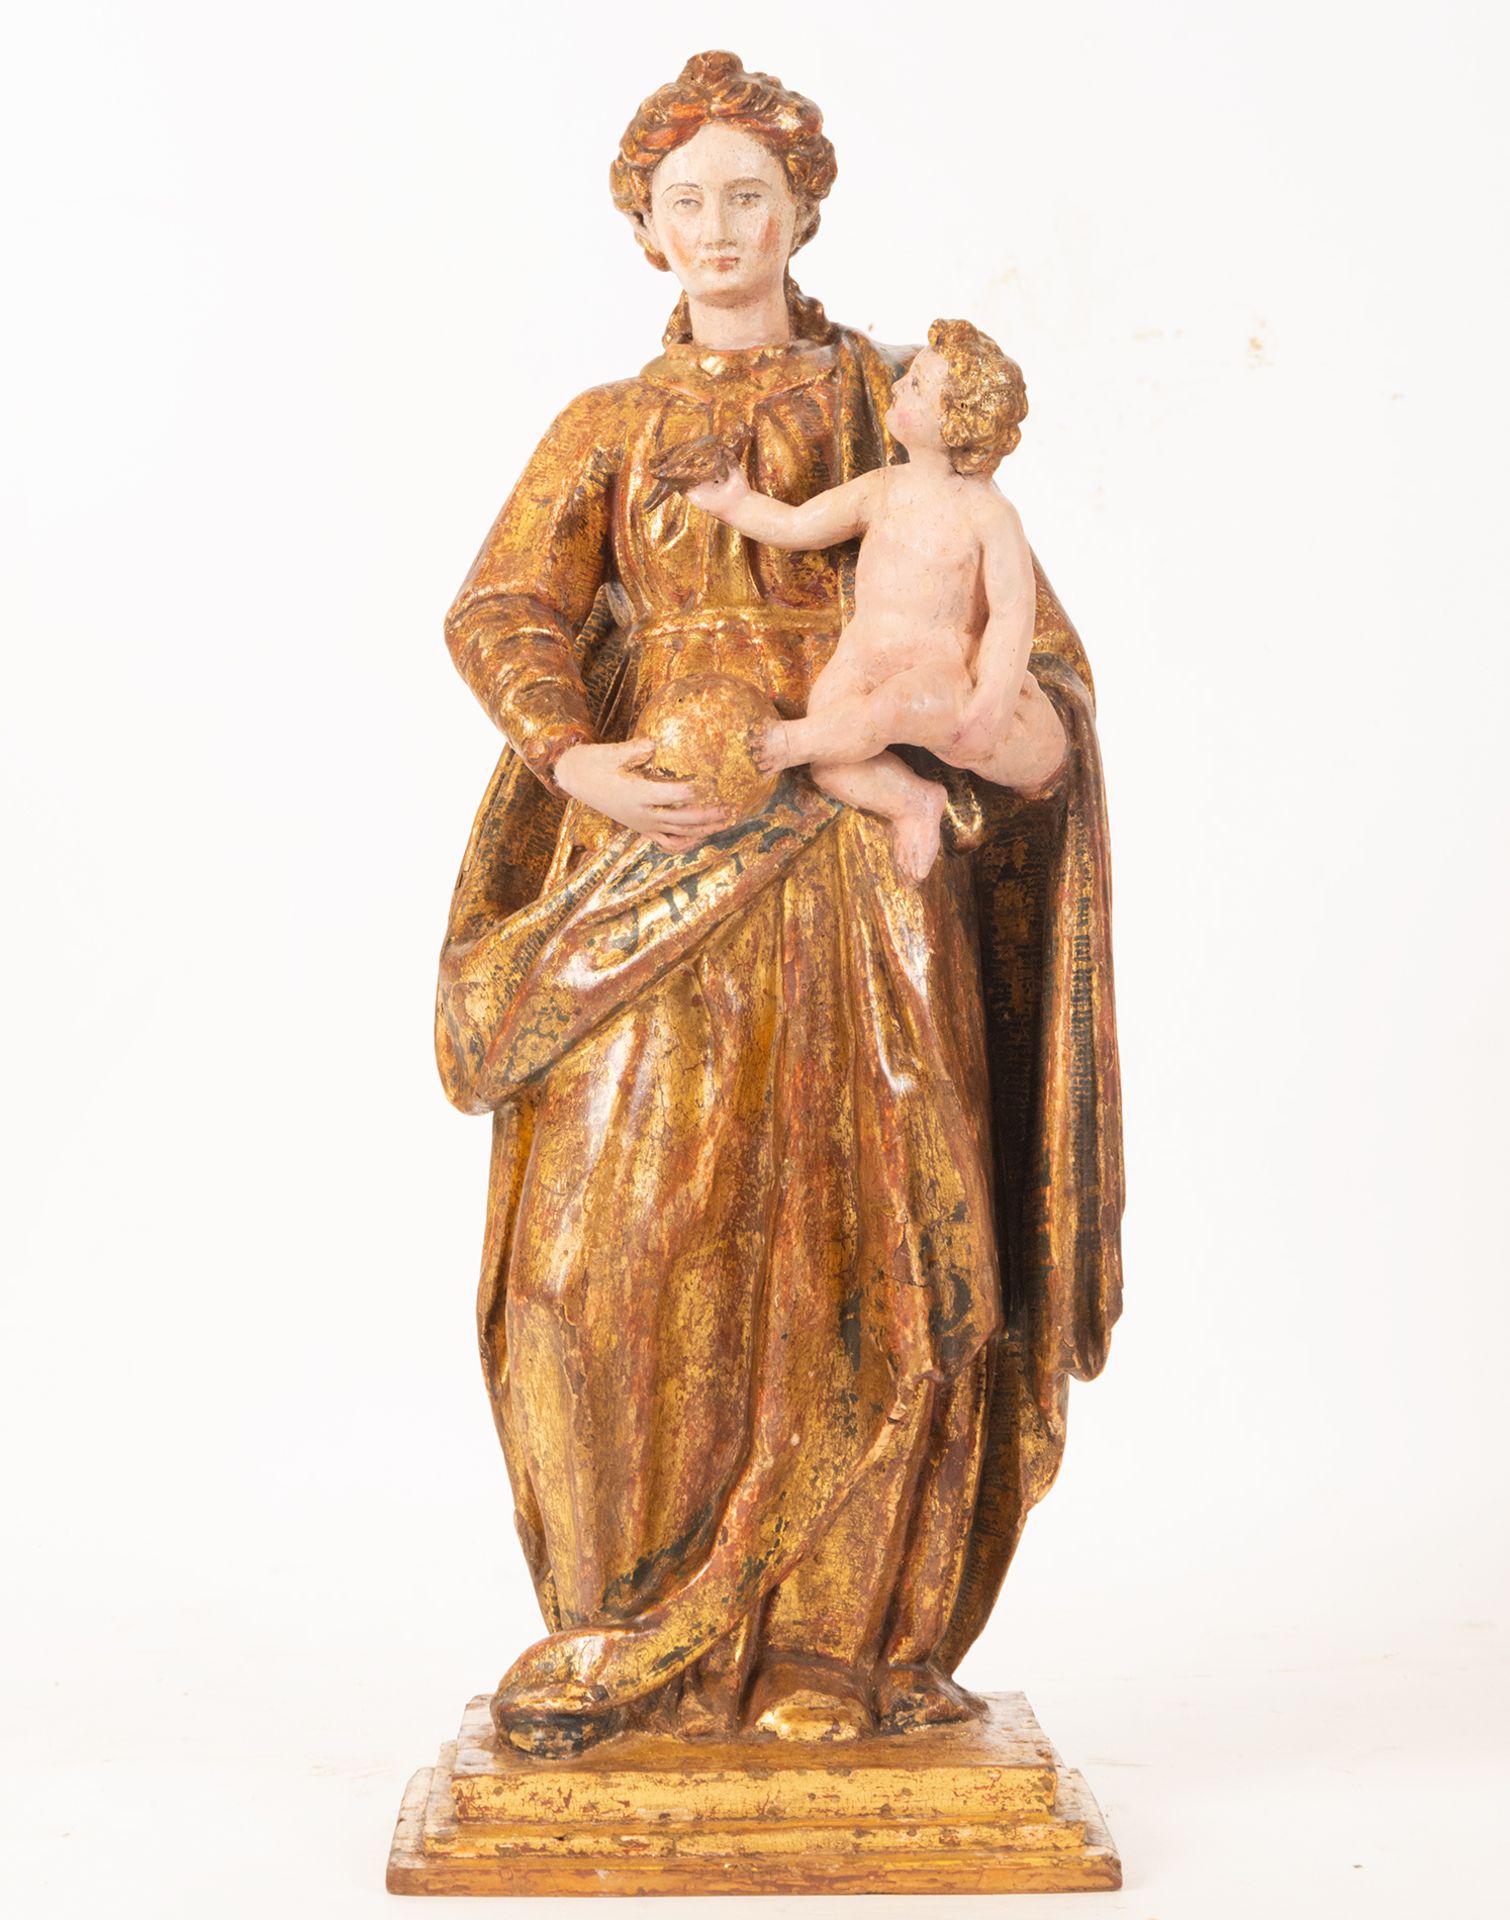 Important Virgin with Child in her arms, Hispano-Flemish school of the 16th century